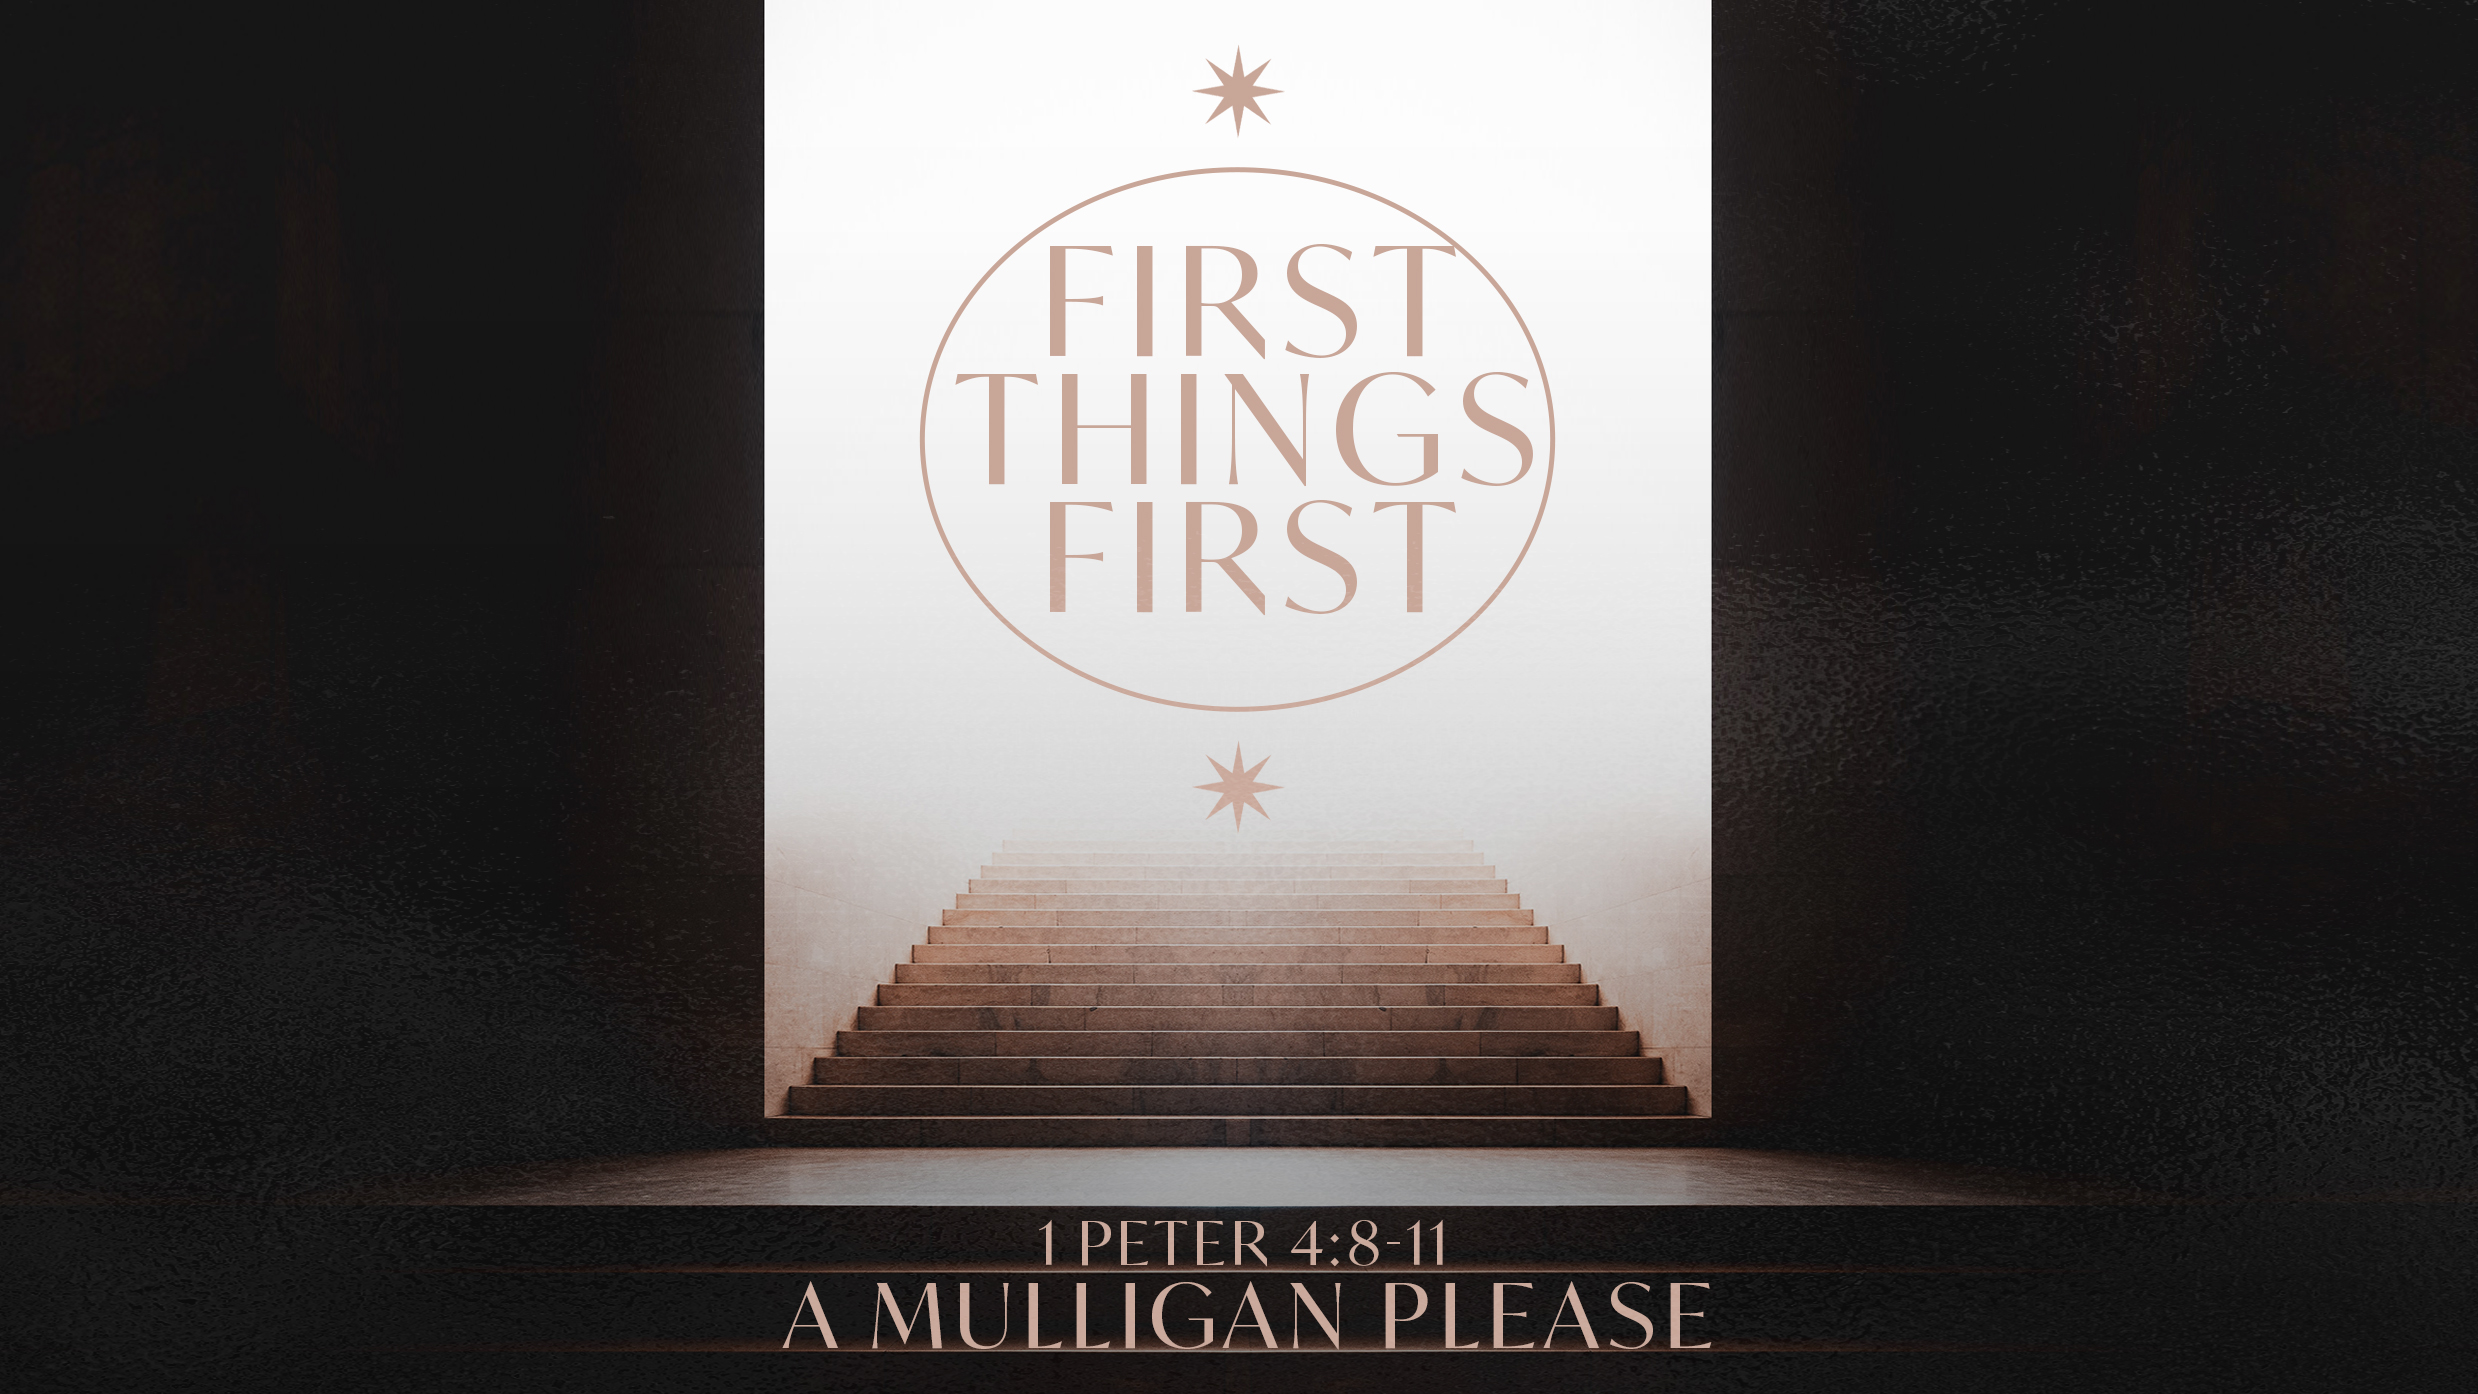 First Things First PART 3 “A MULLIGAN PLEASE” (Traditional Service)